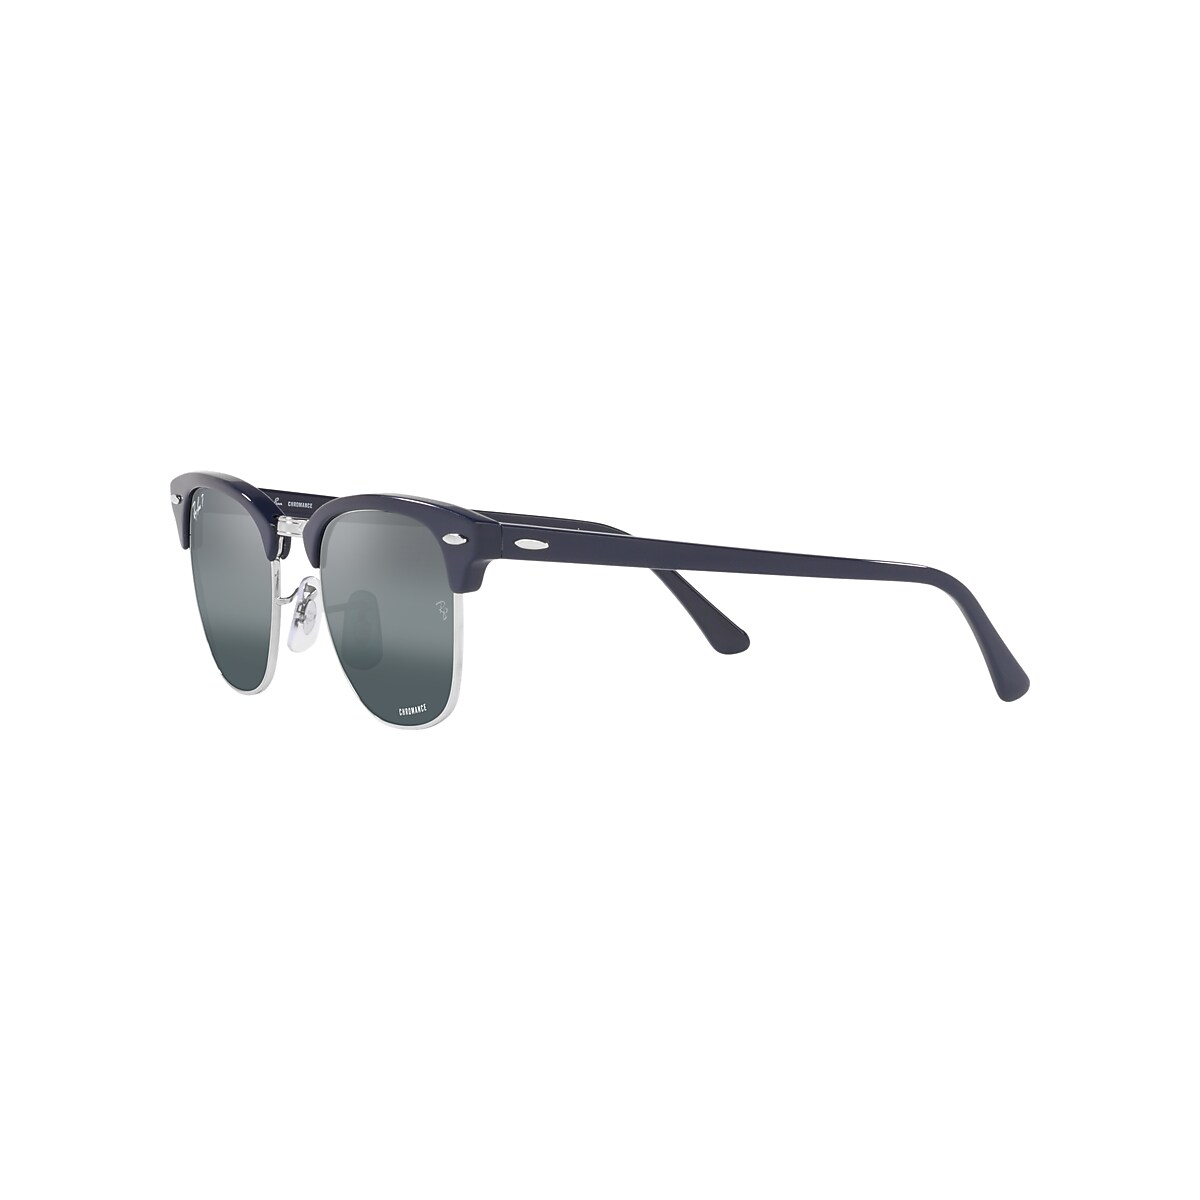 CLUBMASTER CHROMANCE Sunglasses in Blue On Silver and Silver/Blue 